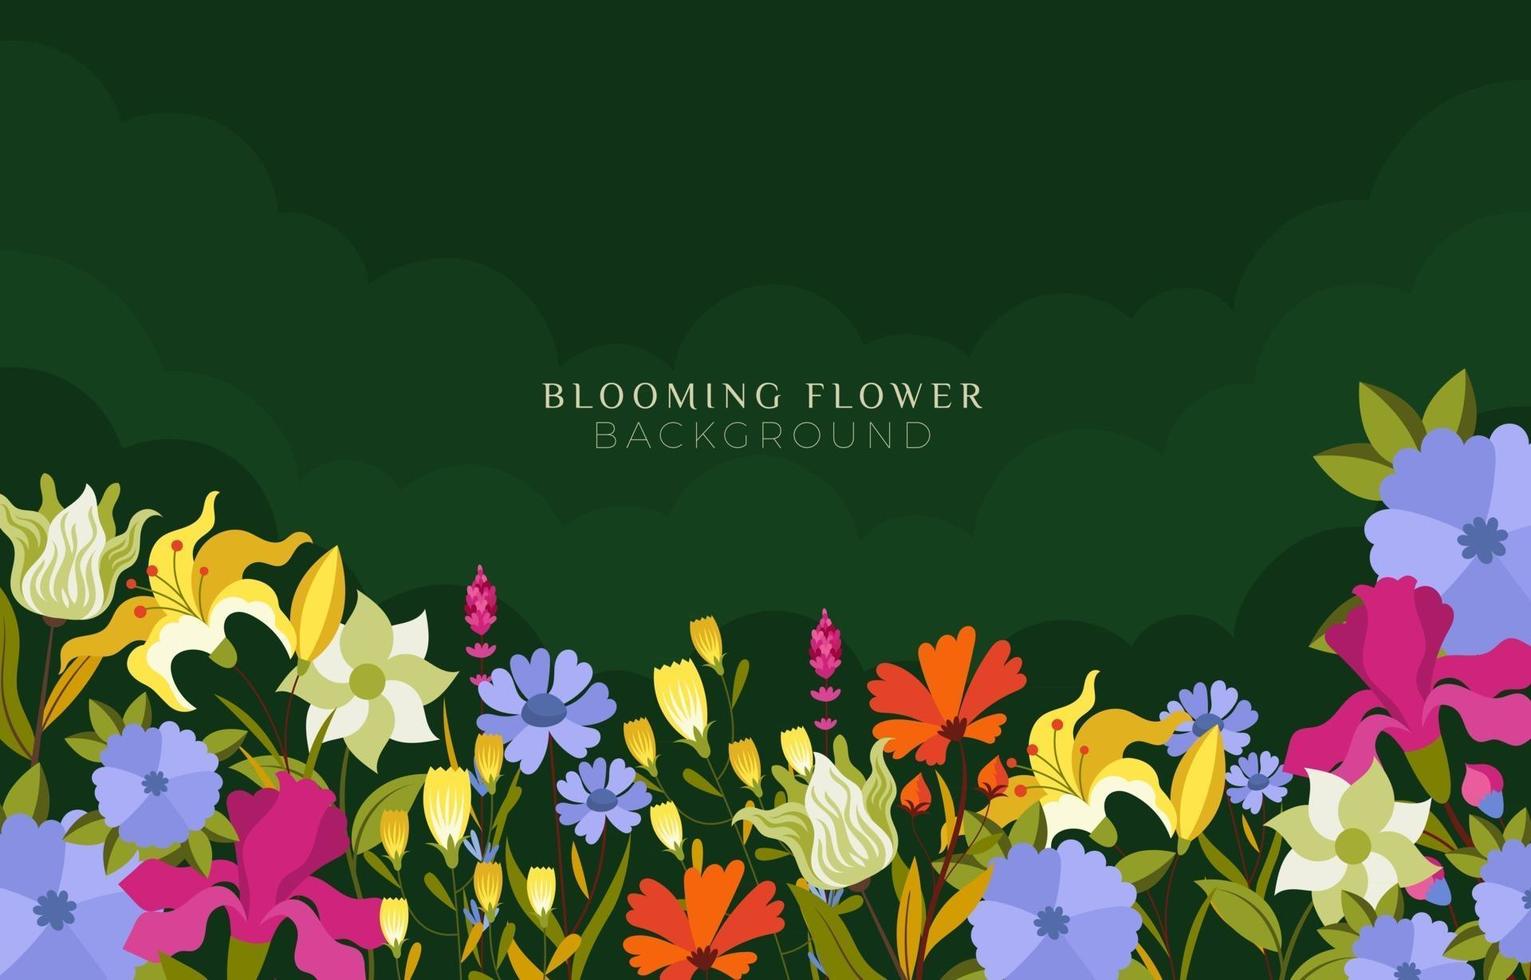 Colorful Field of Flower on a Green Background vector